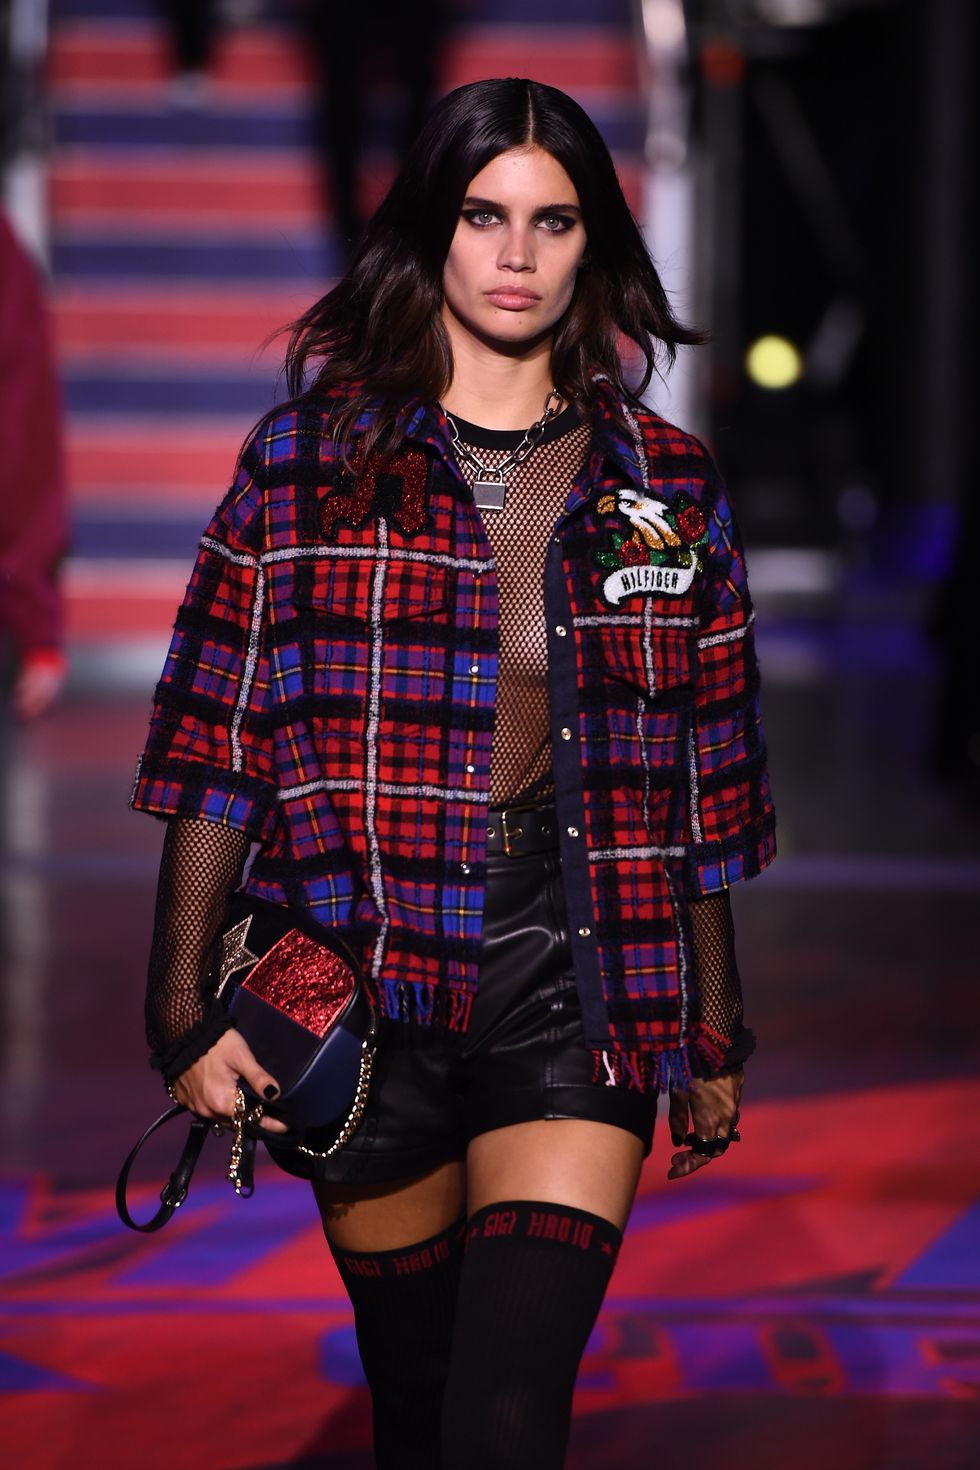 LONDON, ENGLAND - SEPTEMBER 19: Sara Sampaio walks the runway at the Tommy Hilfiger TOMMYNOW Fall 2017 Show during London Fashion Week September 2017 at the Roundhouse on September 19, 2017 in London, England.  (Photo by Ian Gavan/Getty Images for Tommy Hilfiger)